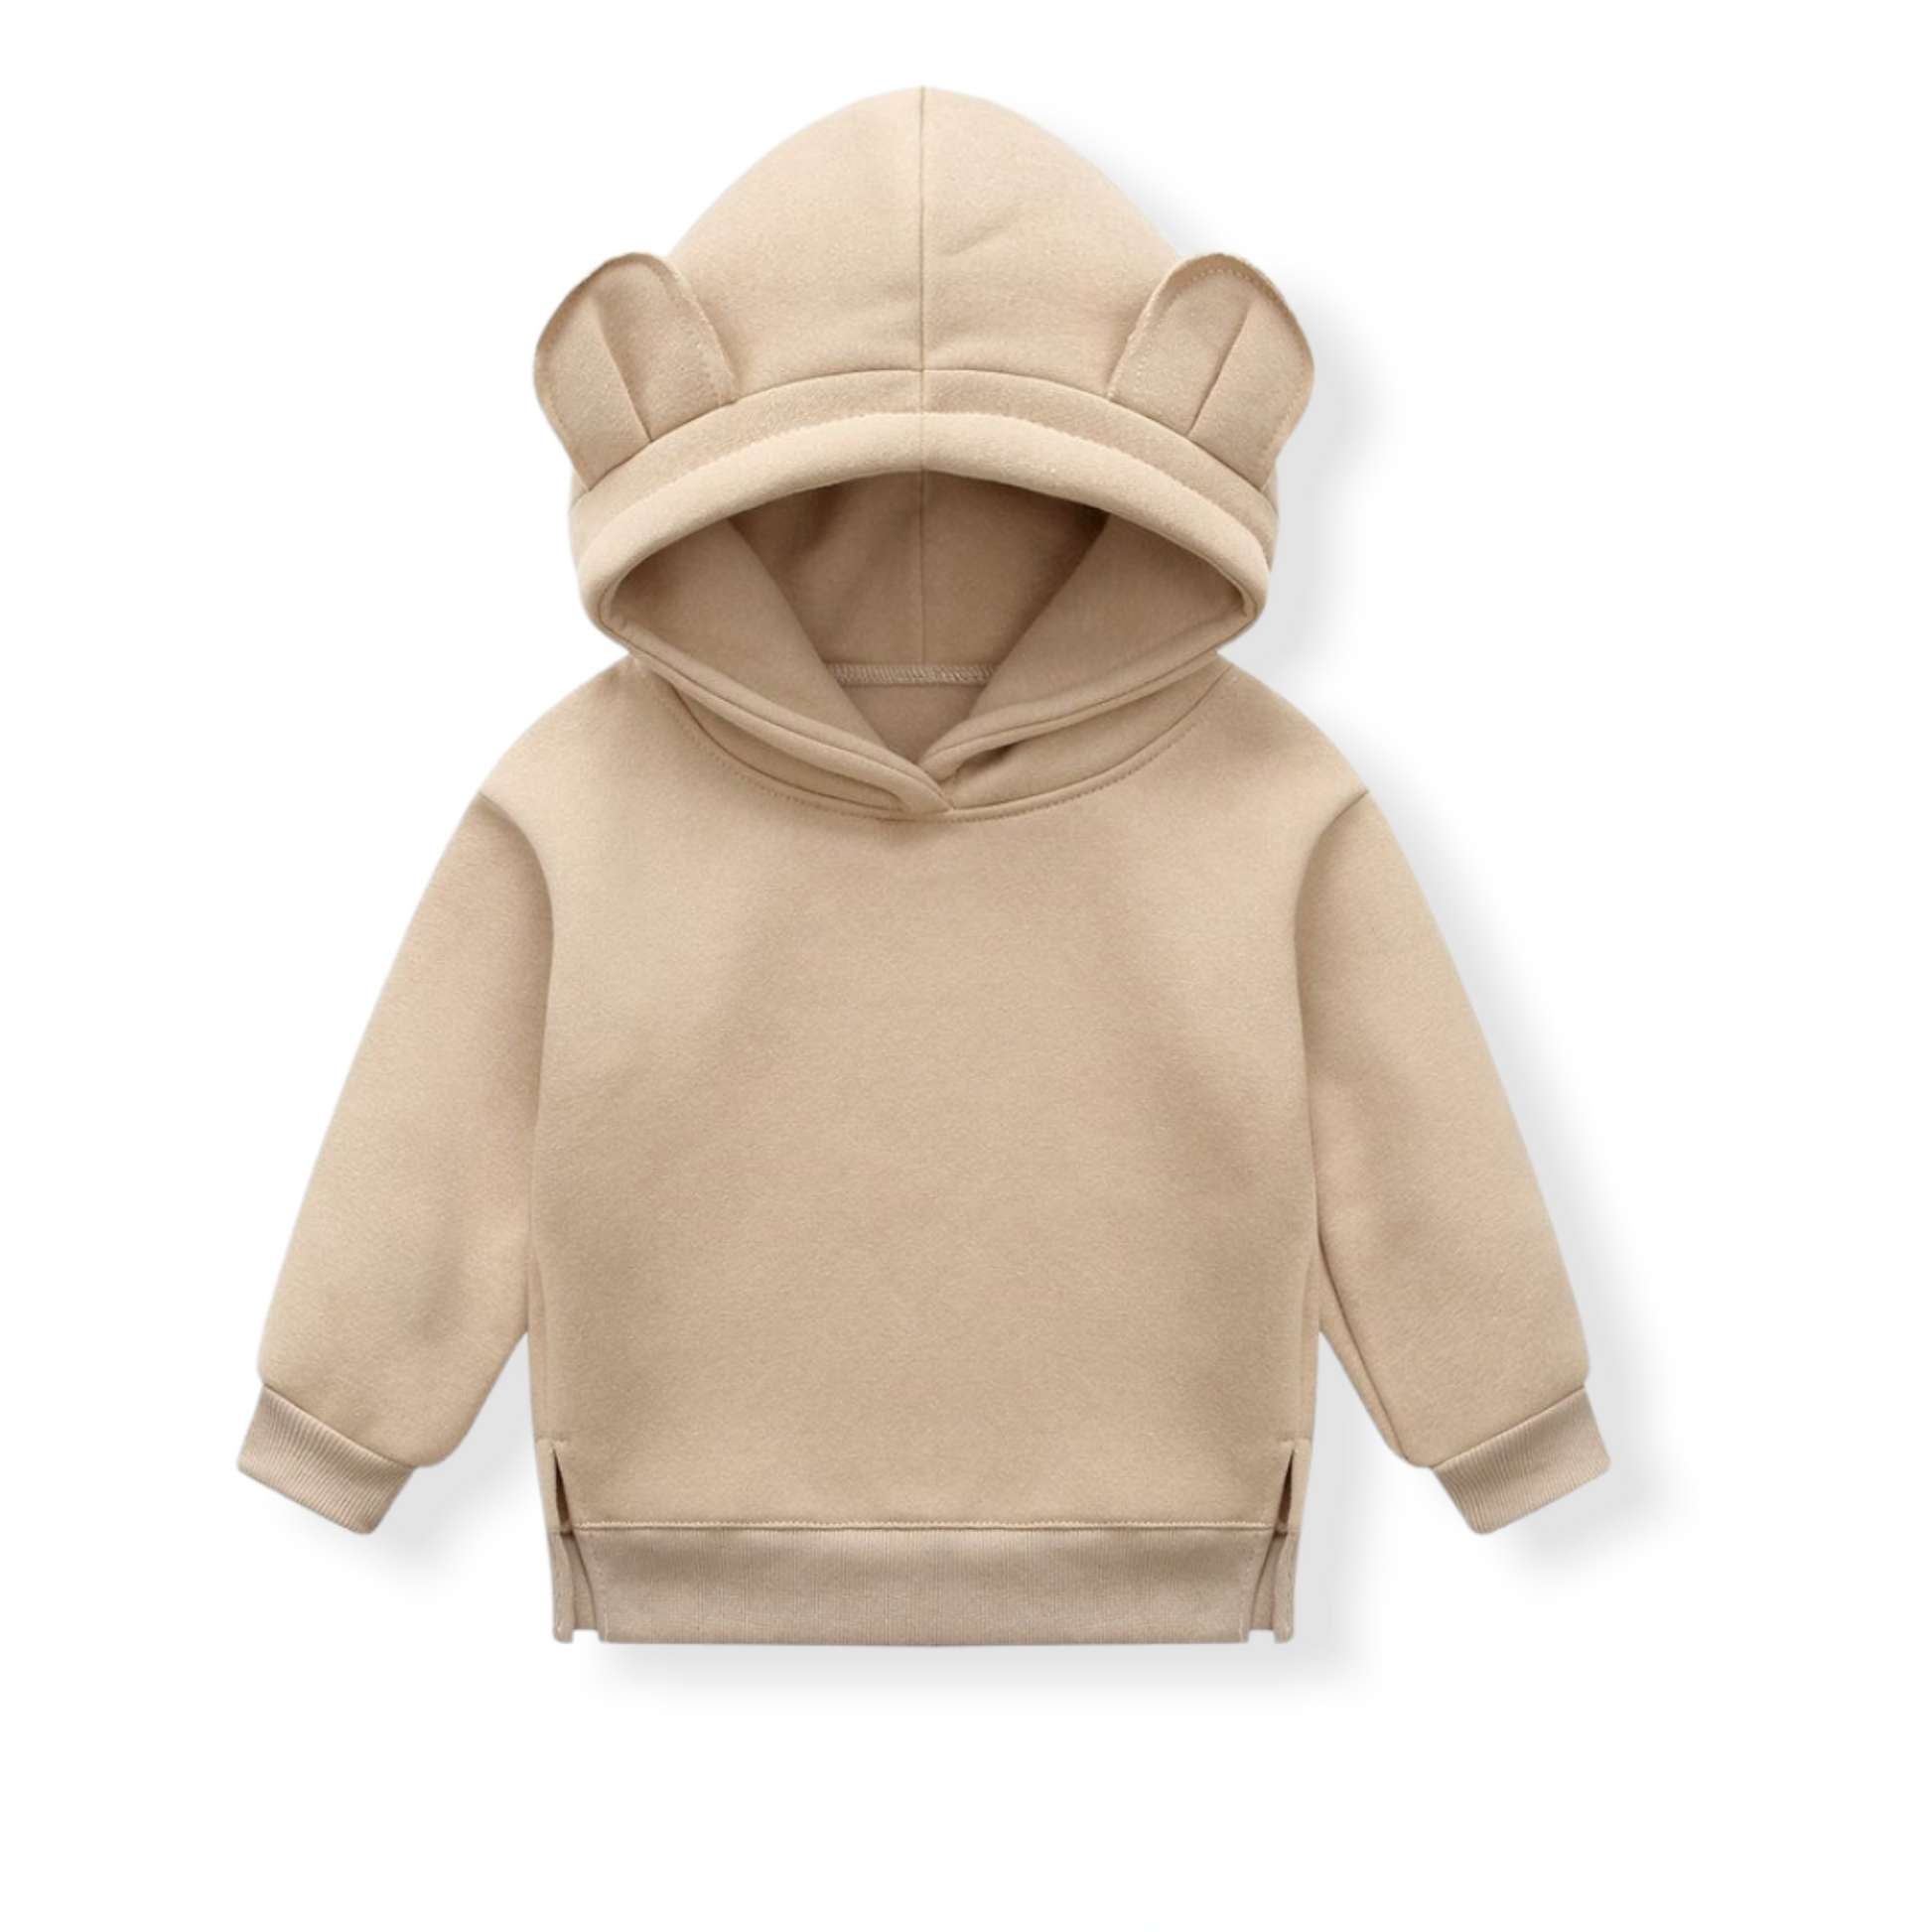 Soft hoodie with Ears for Toddlers in Green- Details